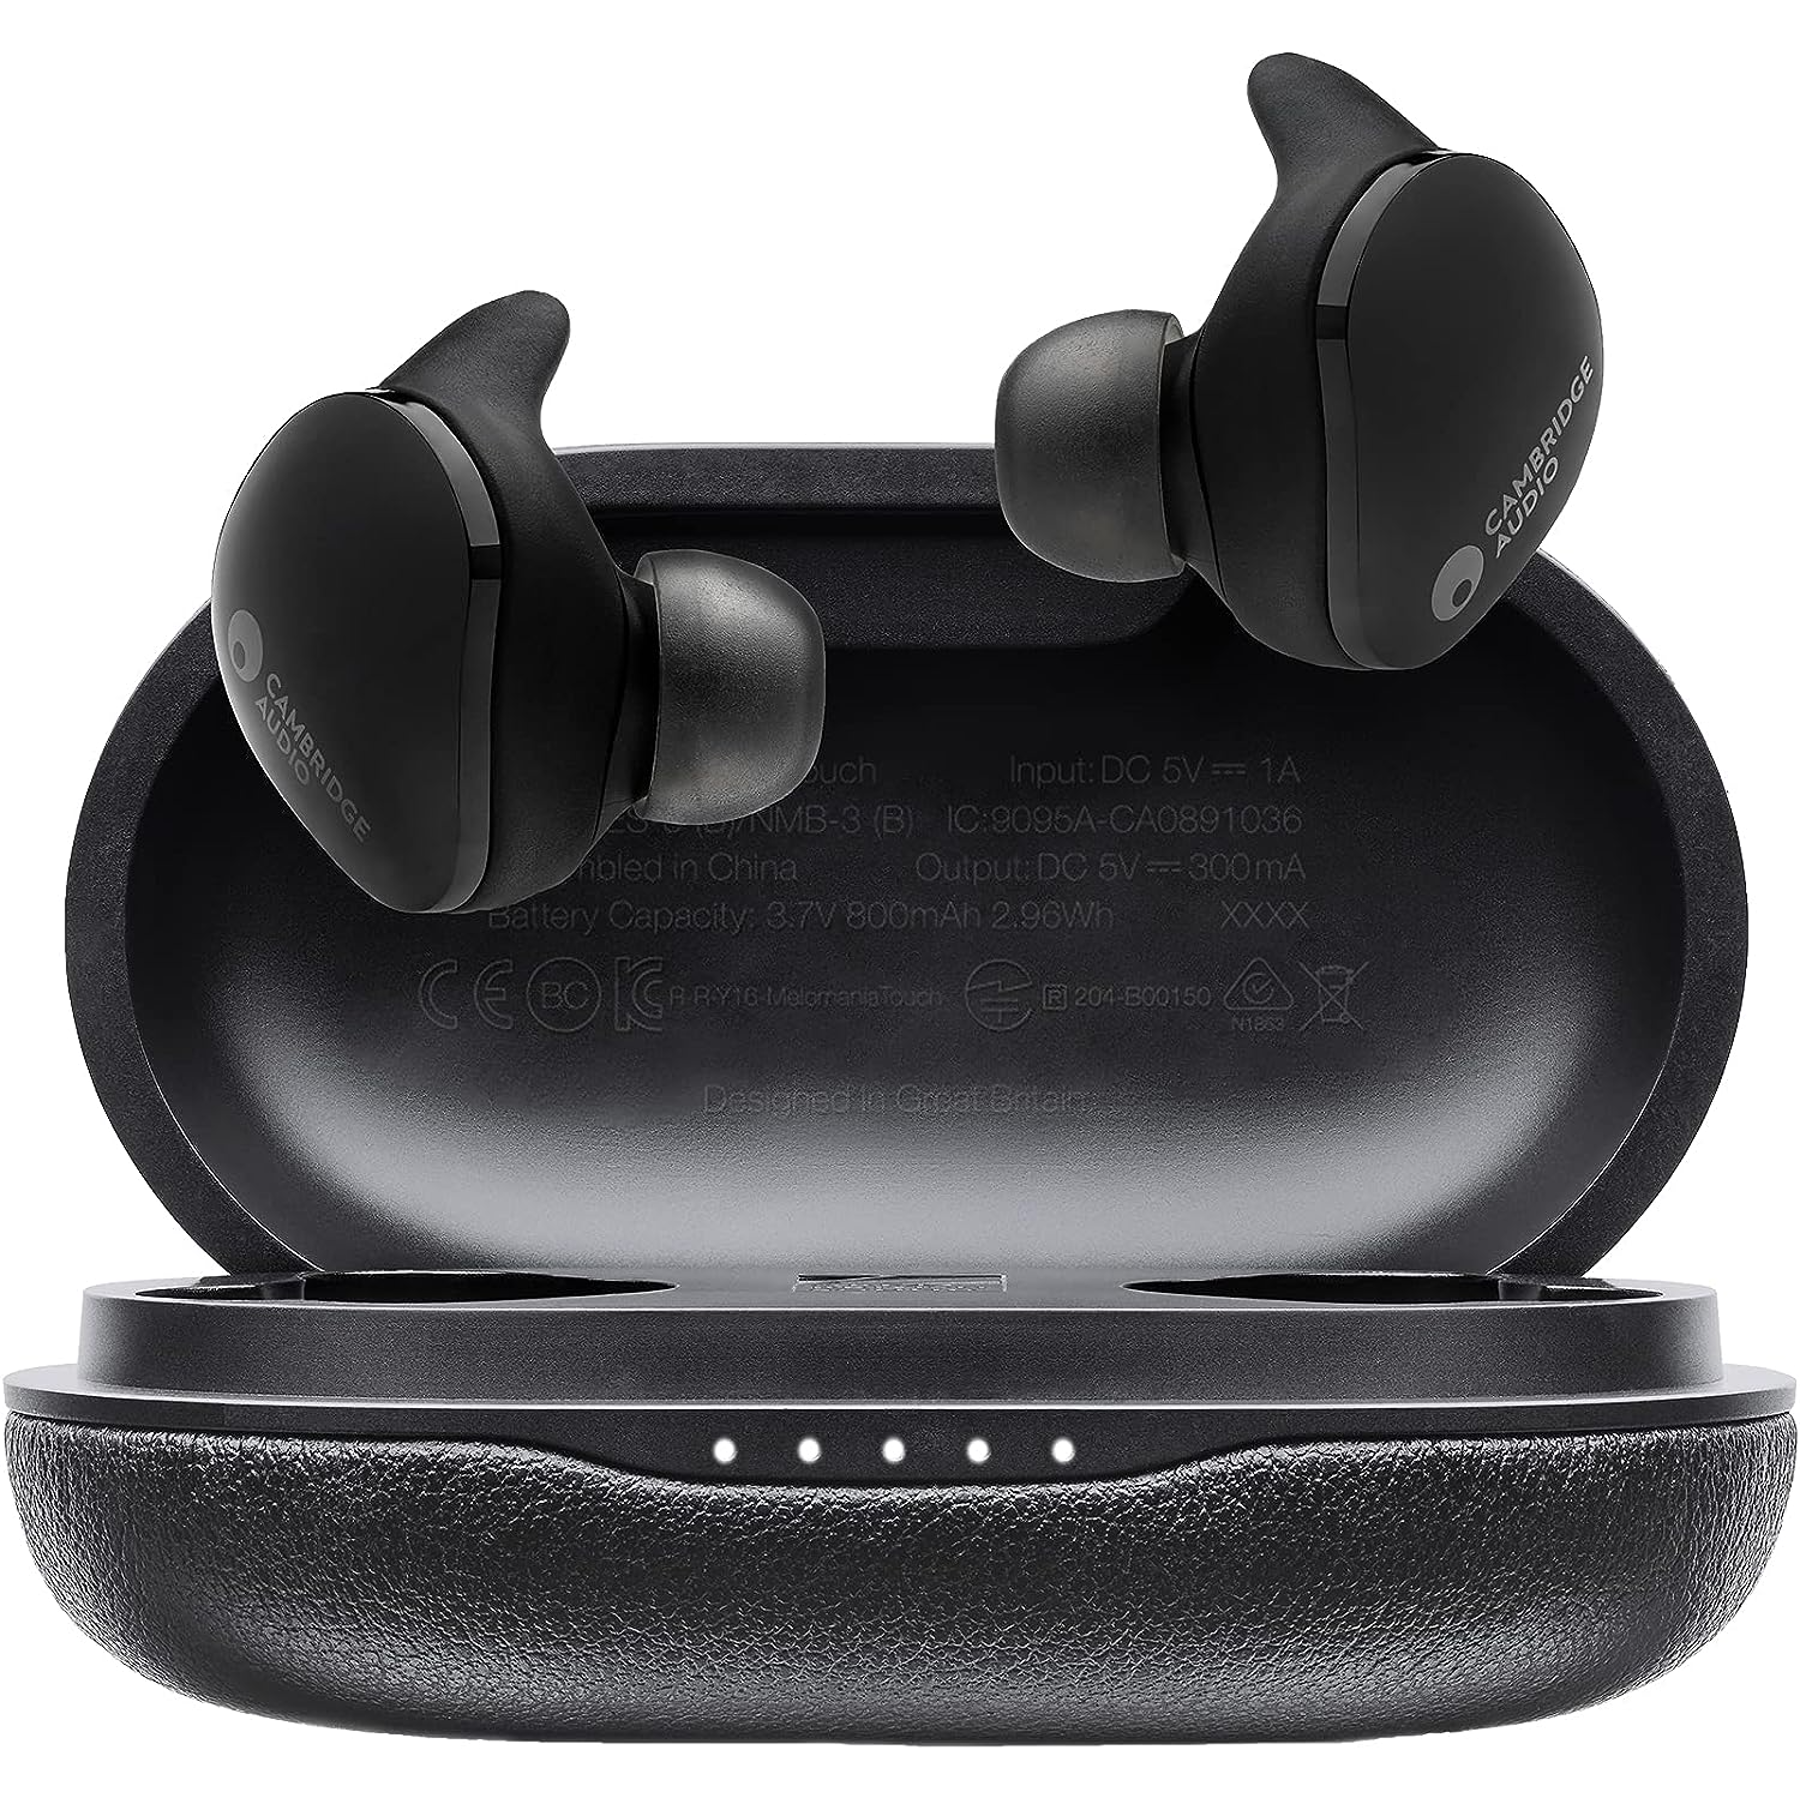 melomania touch 1 Plus earbuds, front view